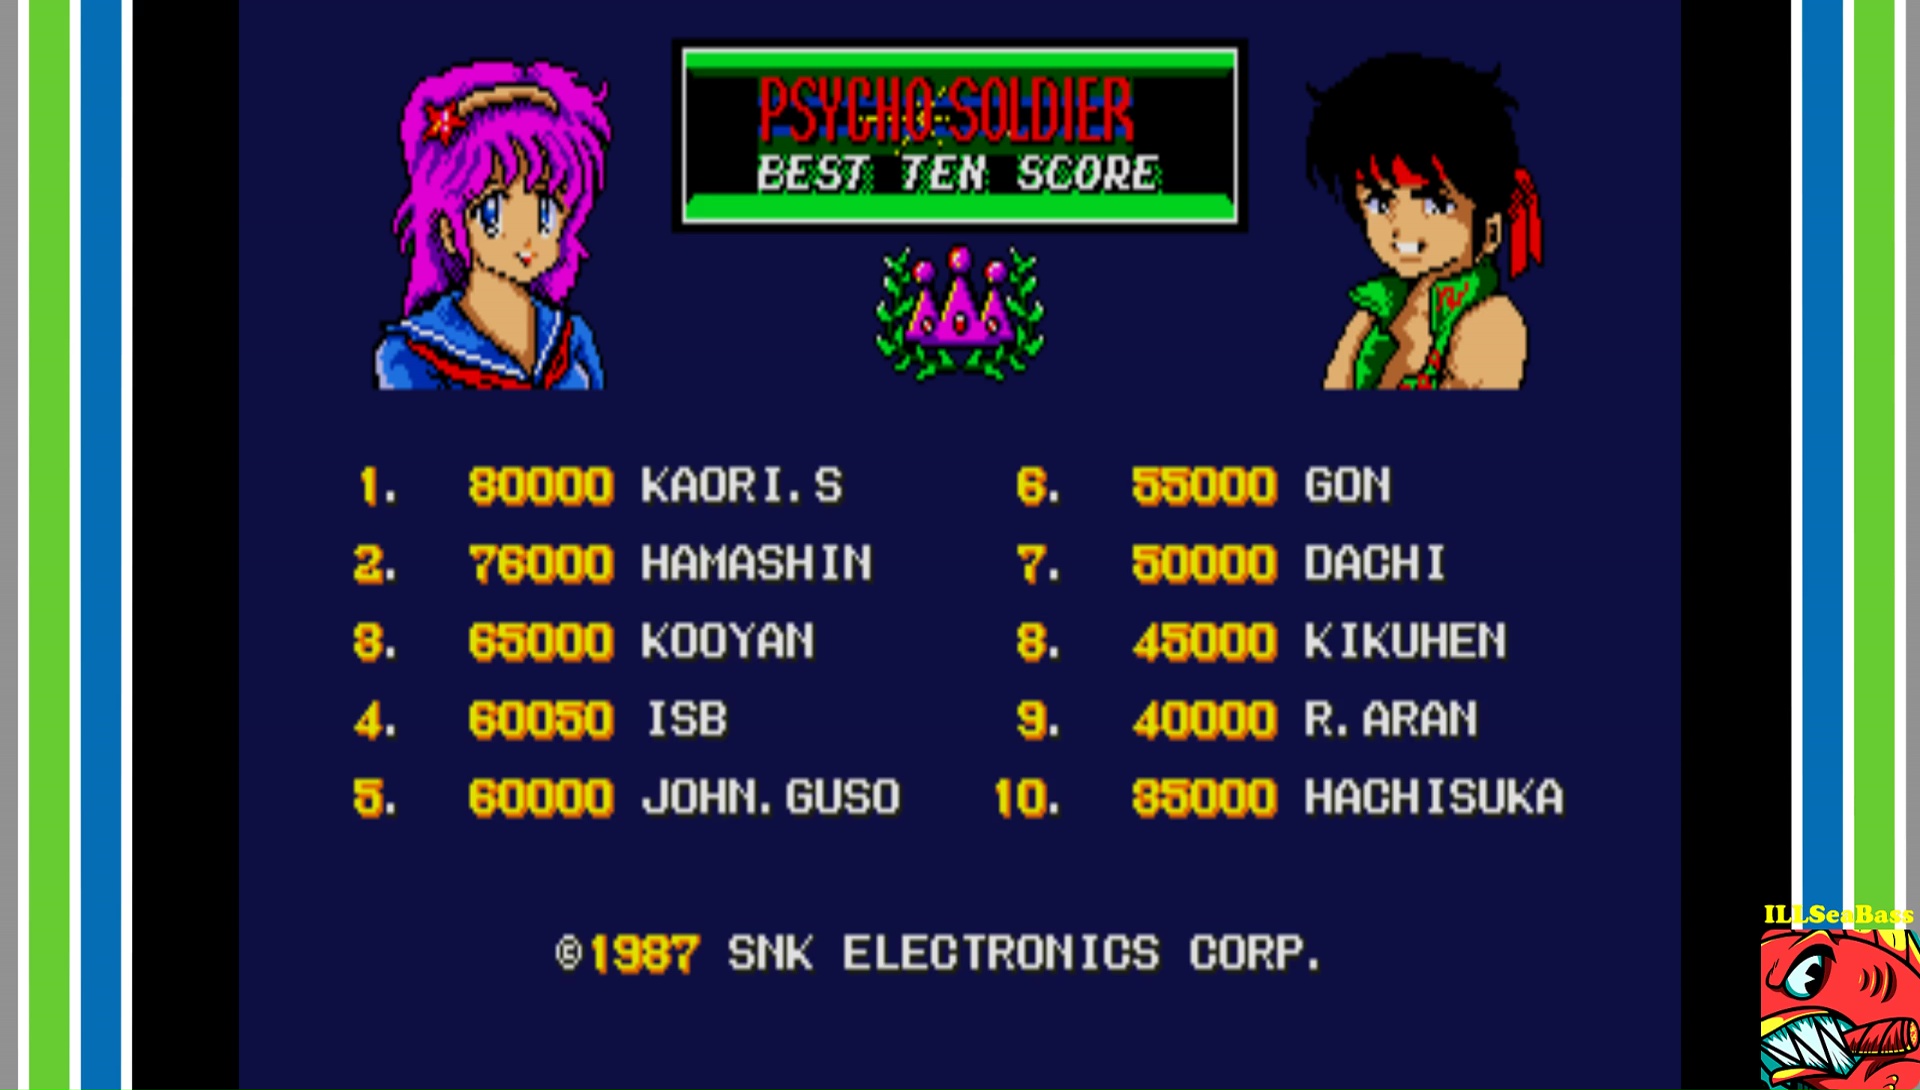 ILLSeaBass: Psycho Soldier (Arcade Emulated / M.A.M.E.) 60,050 points on 2017-08-28 23:53:46